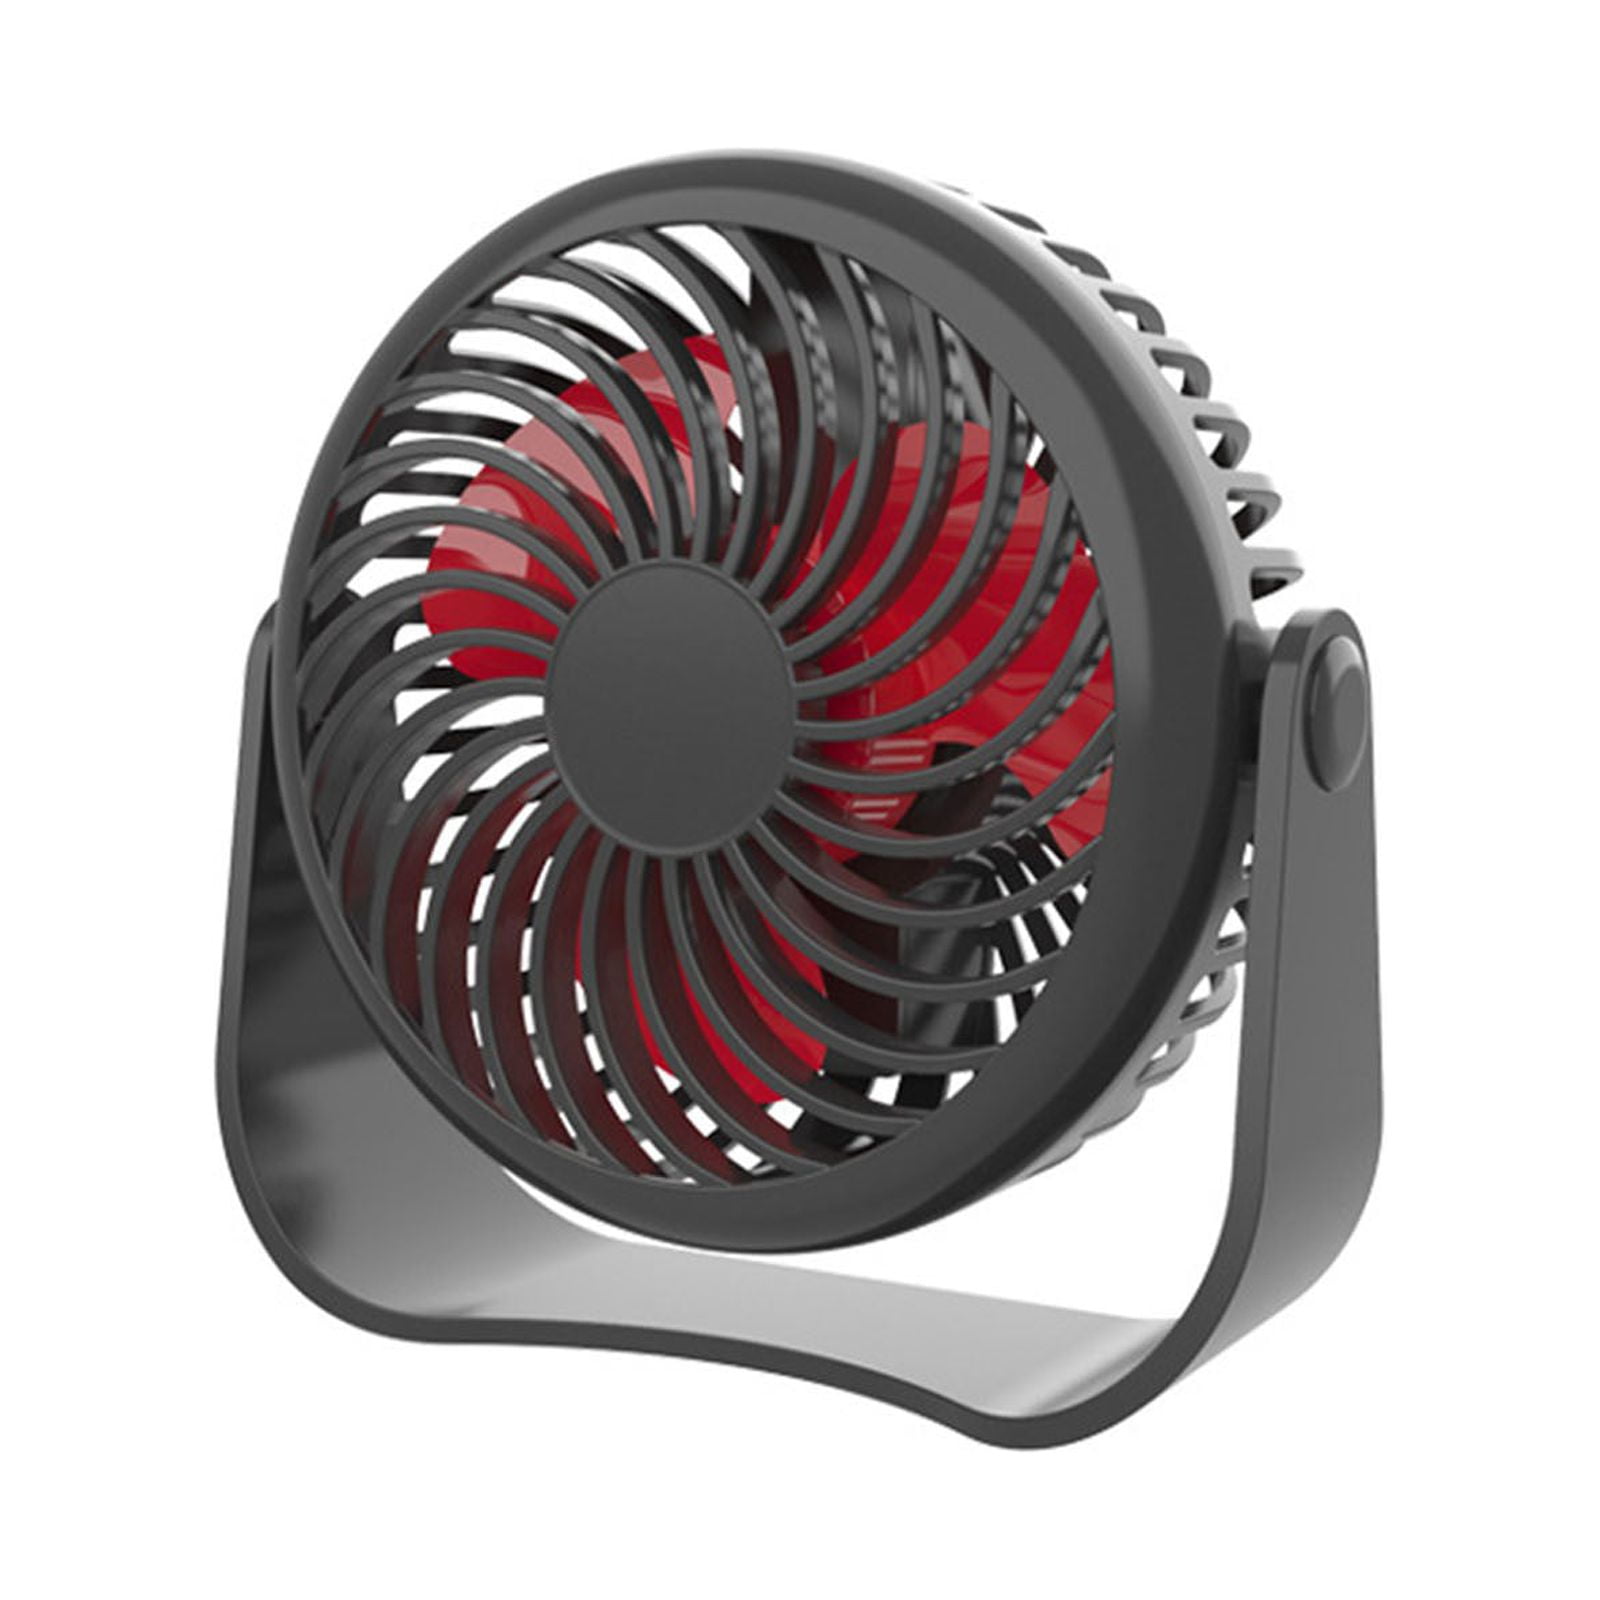 SAUNUOWL Small Desk Fan whit LED light, Portable Quiet Desktop Fans with 3  Speeds Strong Airflow, Rechargeable USB Powered Mini Fan,120° Oscillating